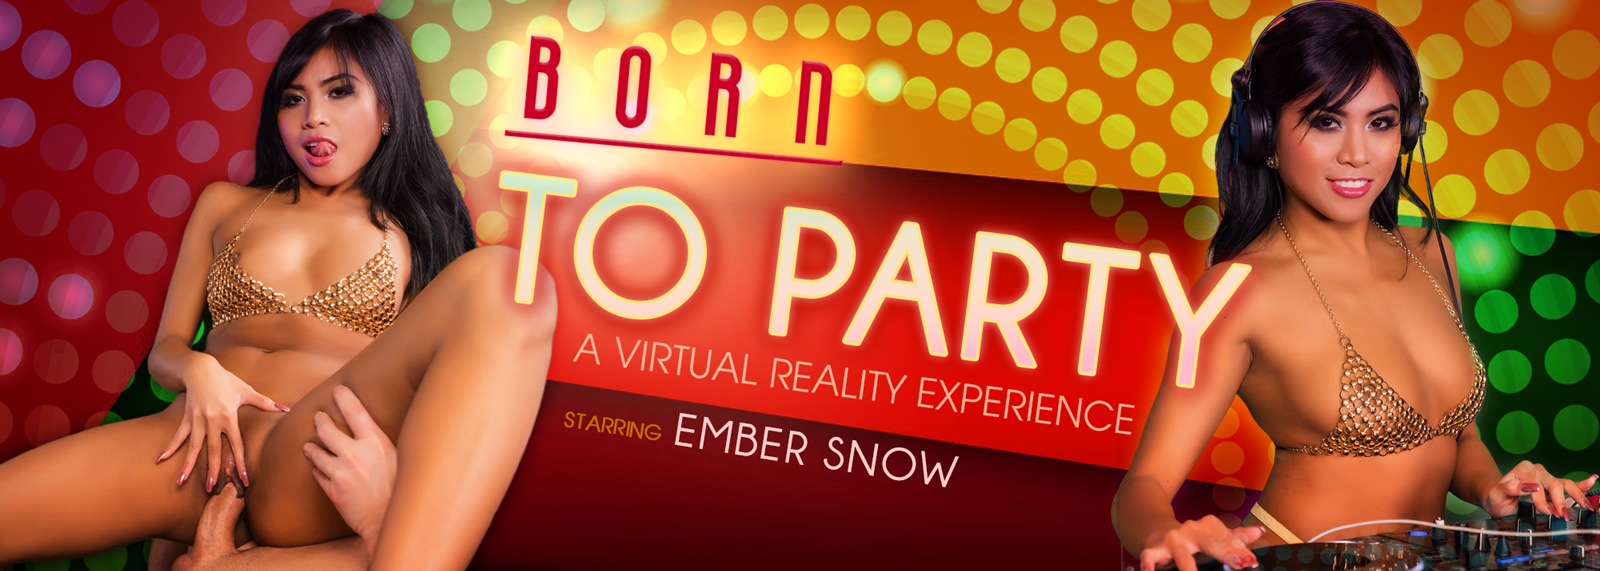 Born to Party with Ember Snow  Slideshow